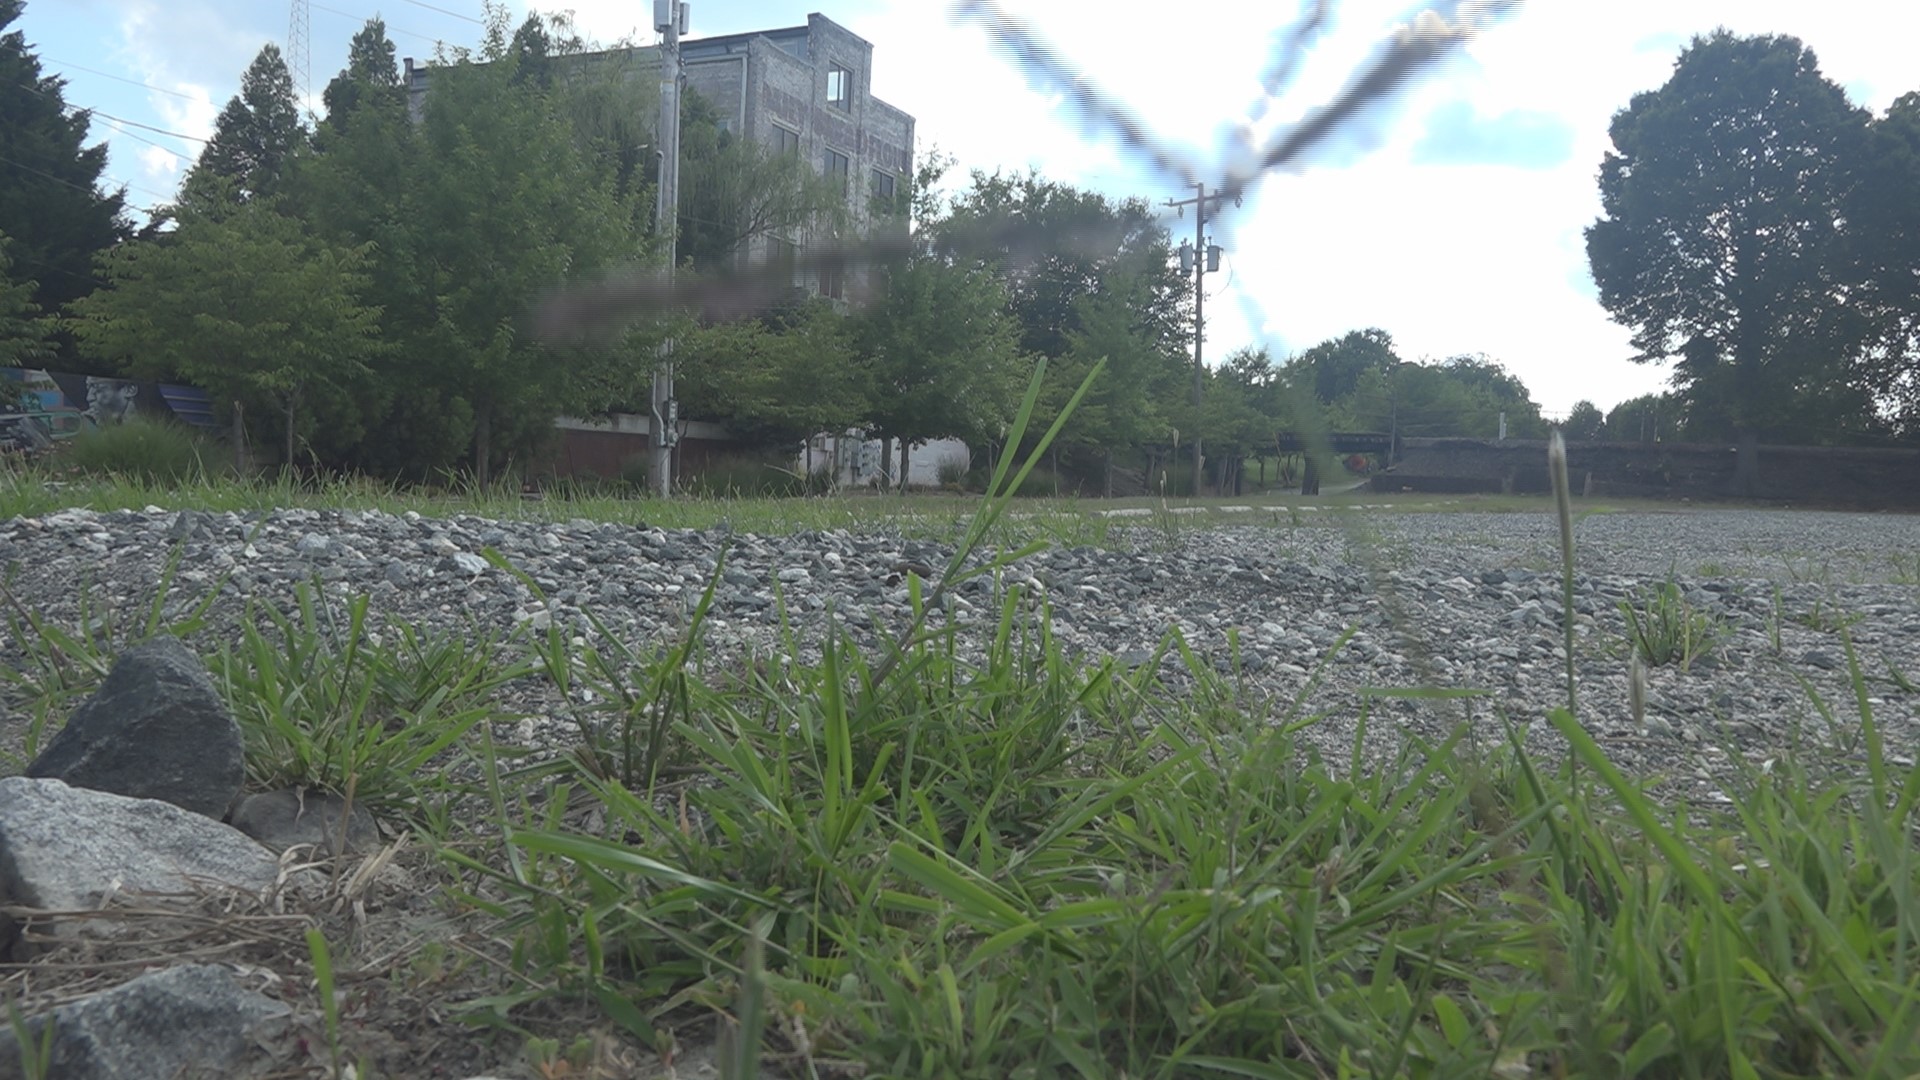 The City of Greensboro says the plot of land Lidl bought is contaminated by industrial waste.